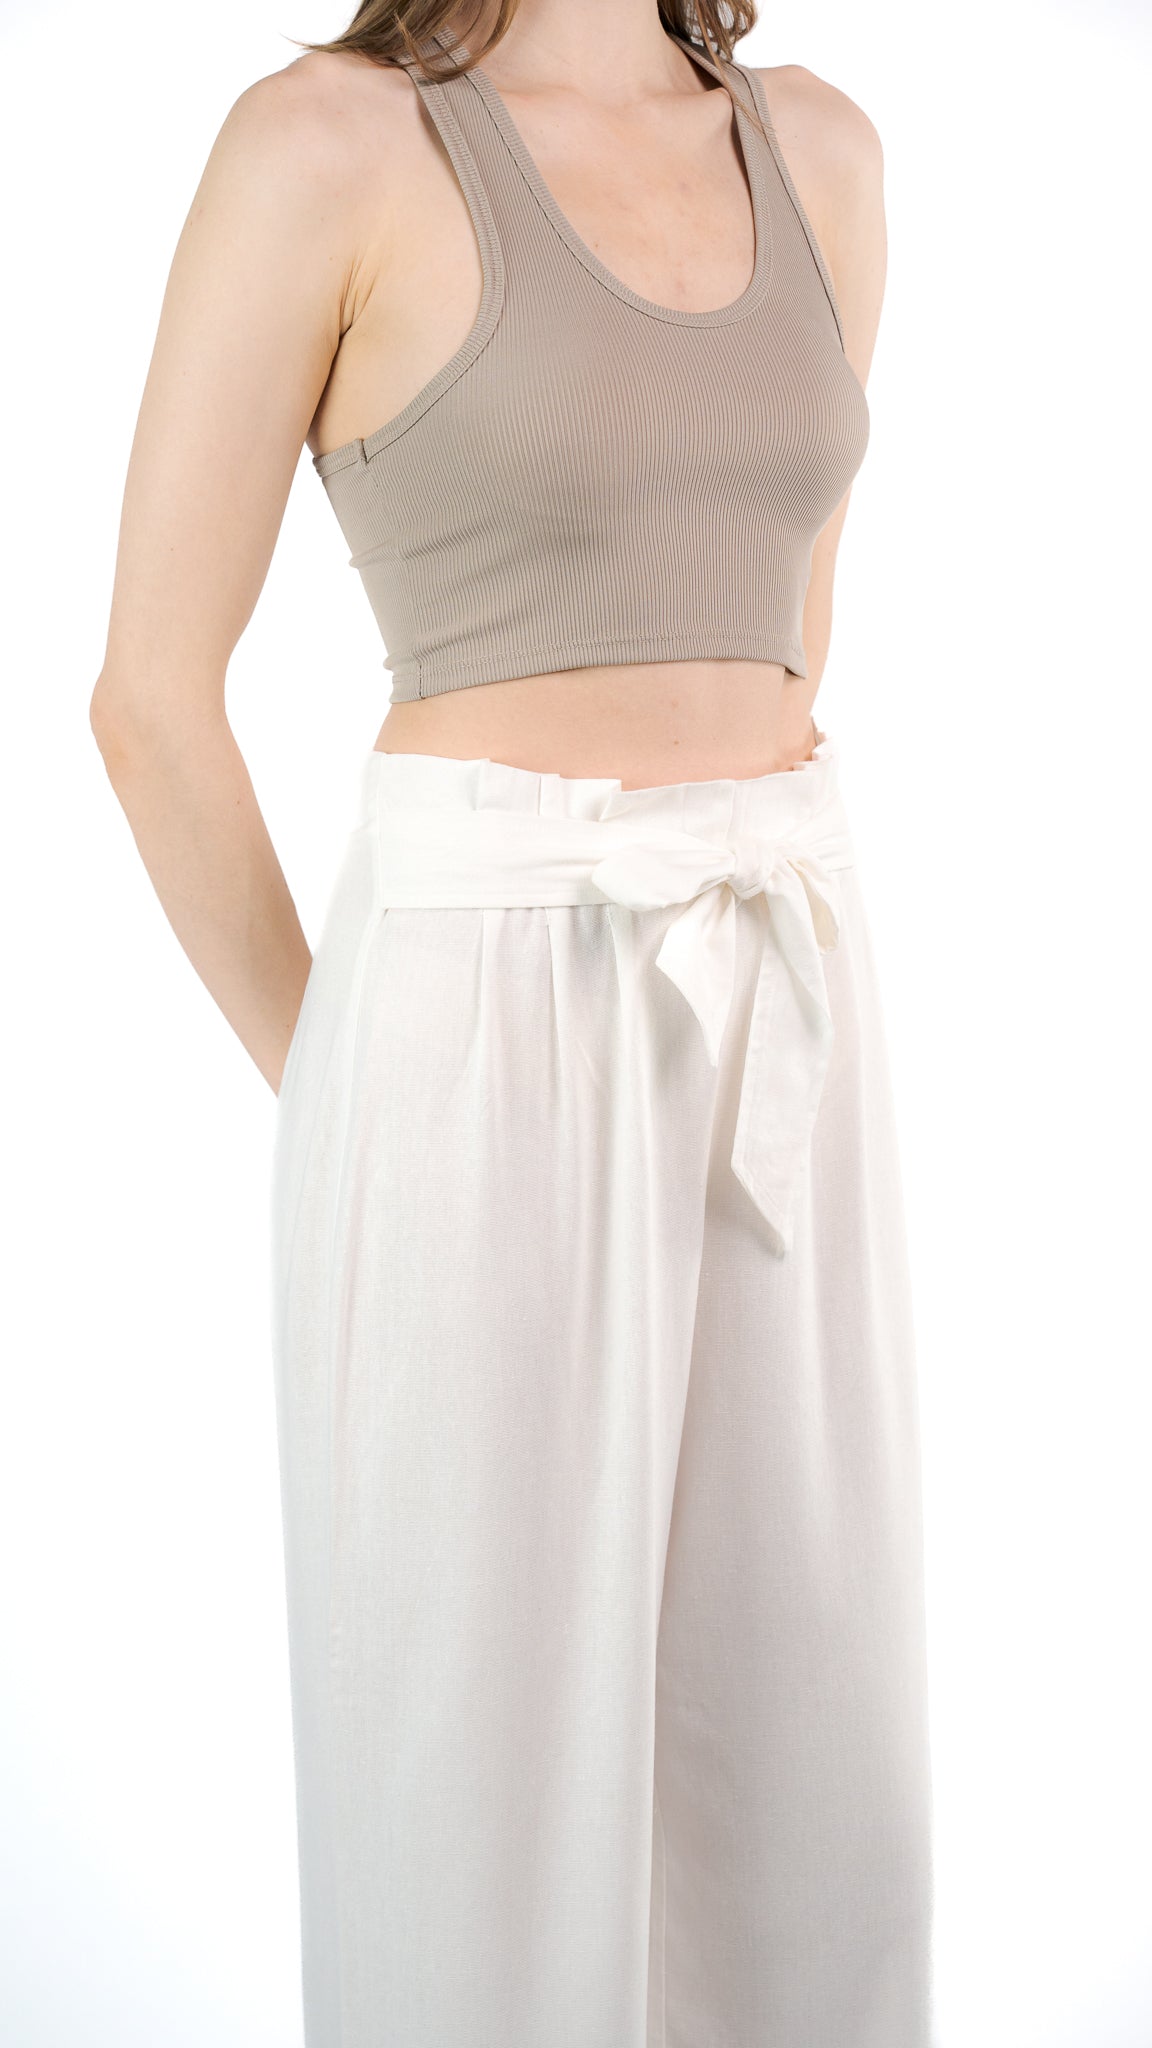 Women's Casual Wide Leg Pants High Waisted Self Tie Belted